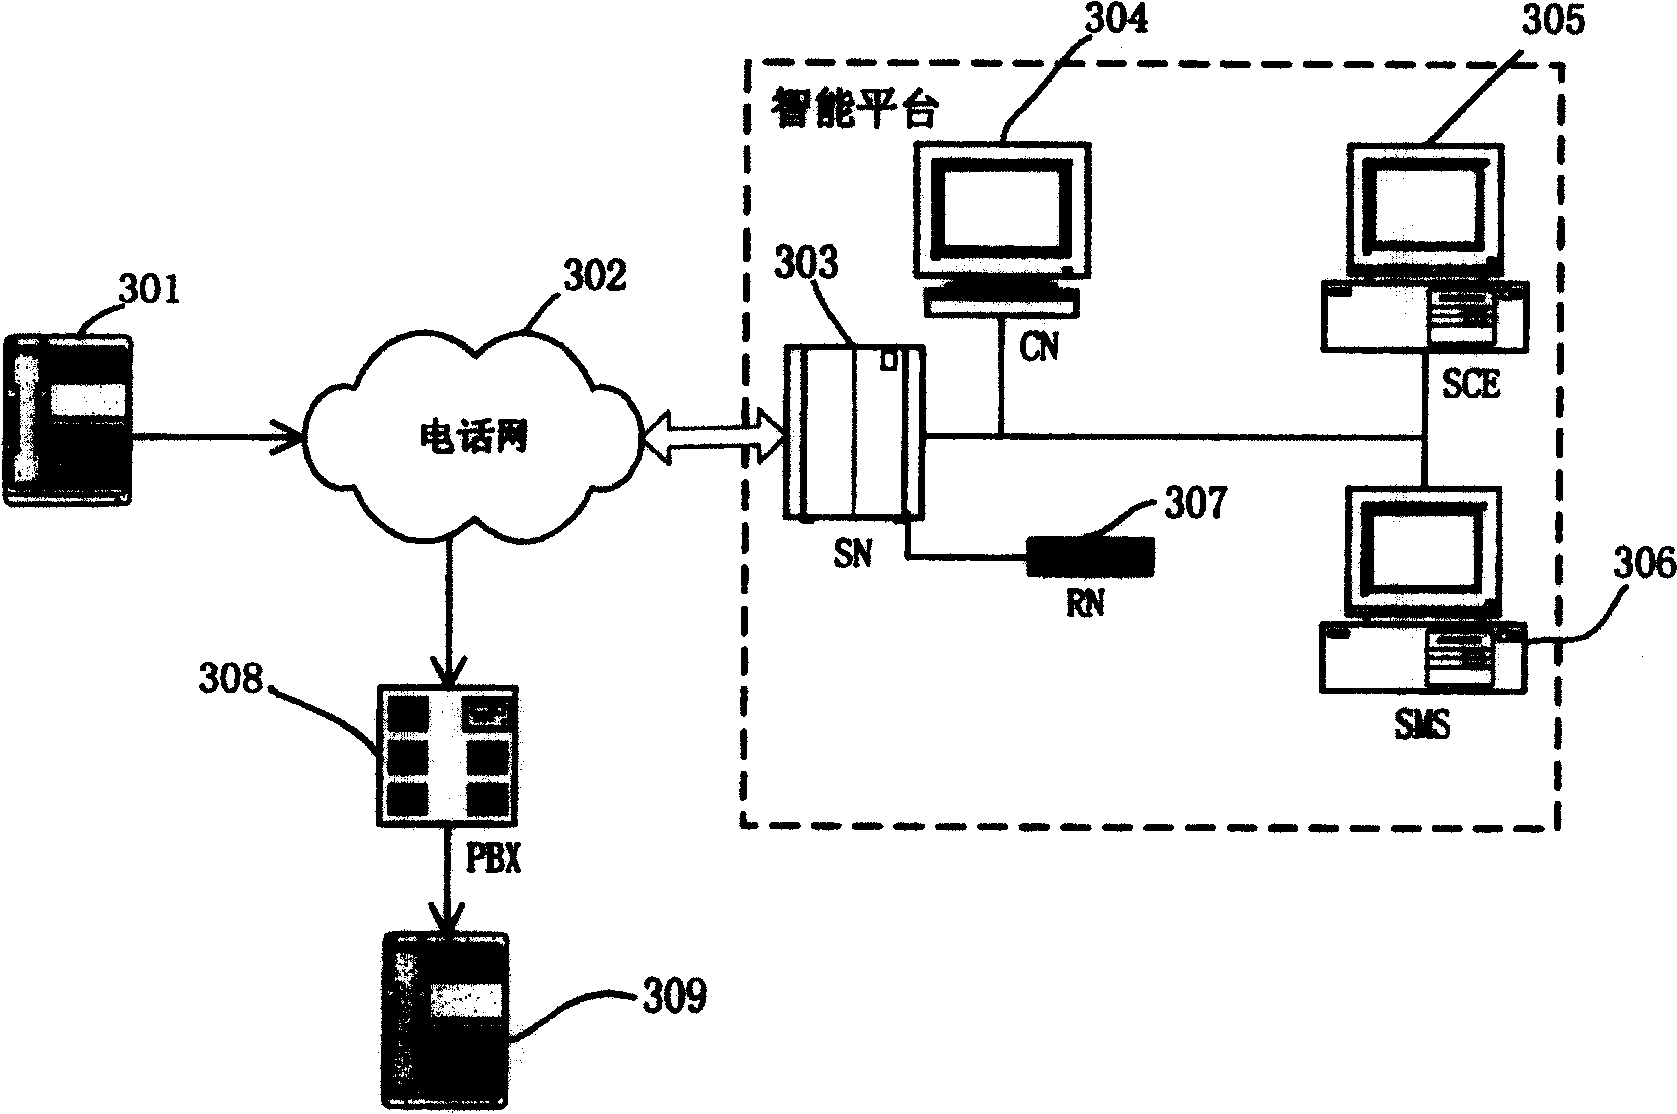 Method of automatic extension telephone subscriber jointing in value added telecommunication service